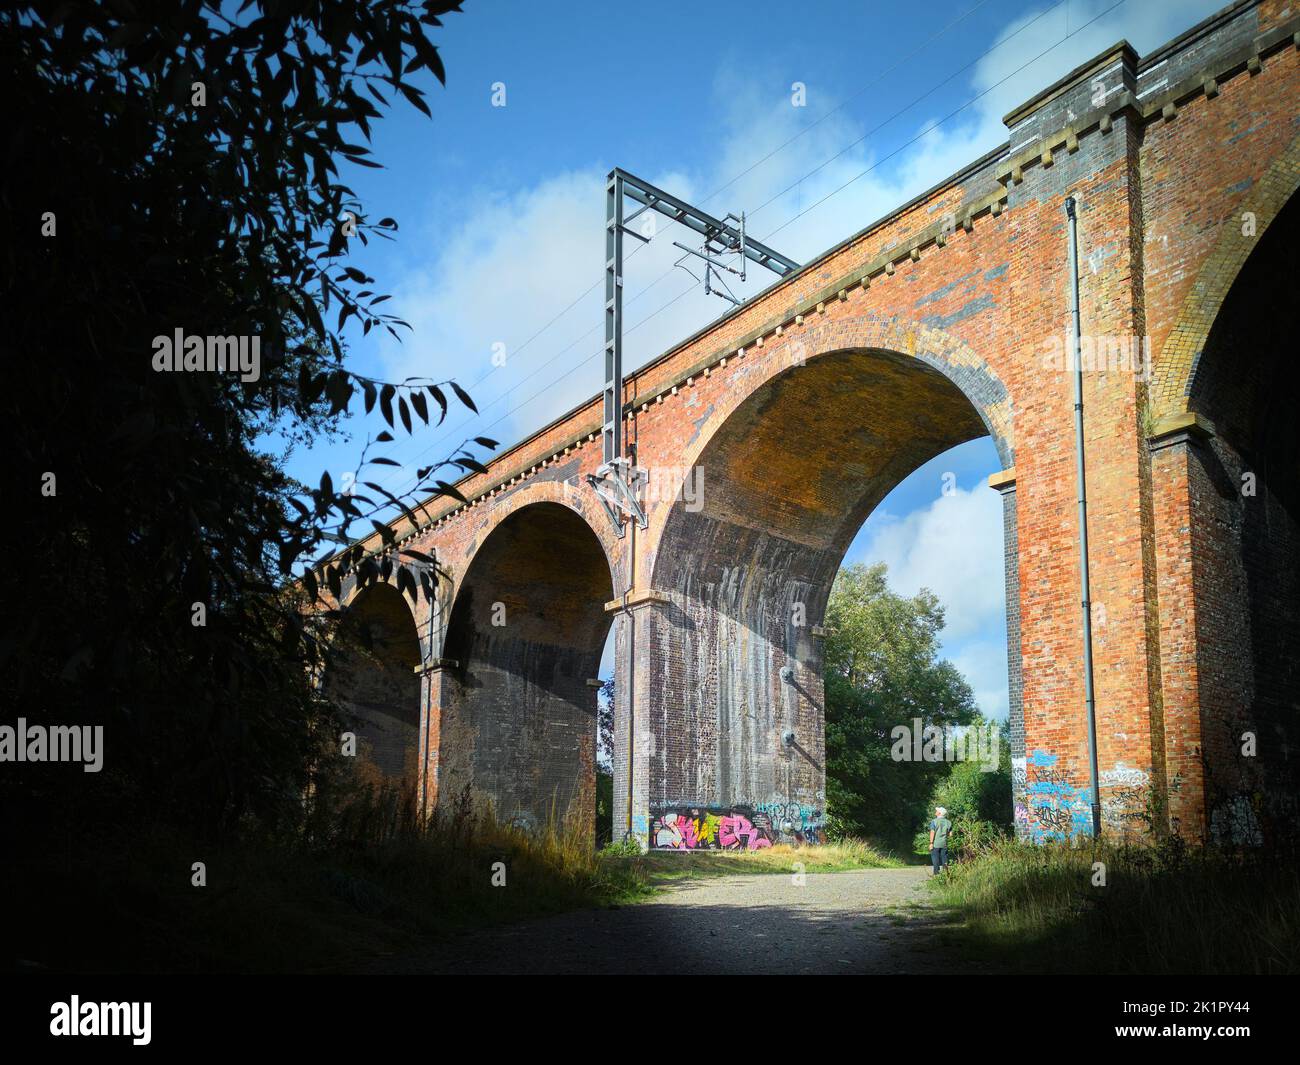 A man looks up at the arches of a victorian brick built railway viaduct, now electirified, in the countryside near Corby, England. Stock Photo